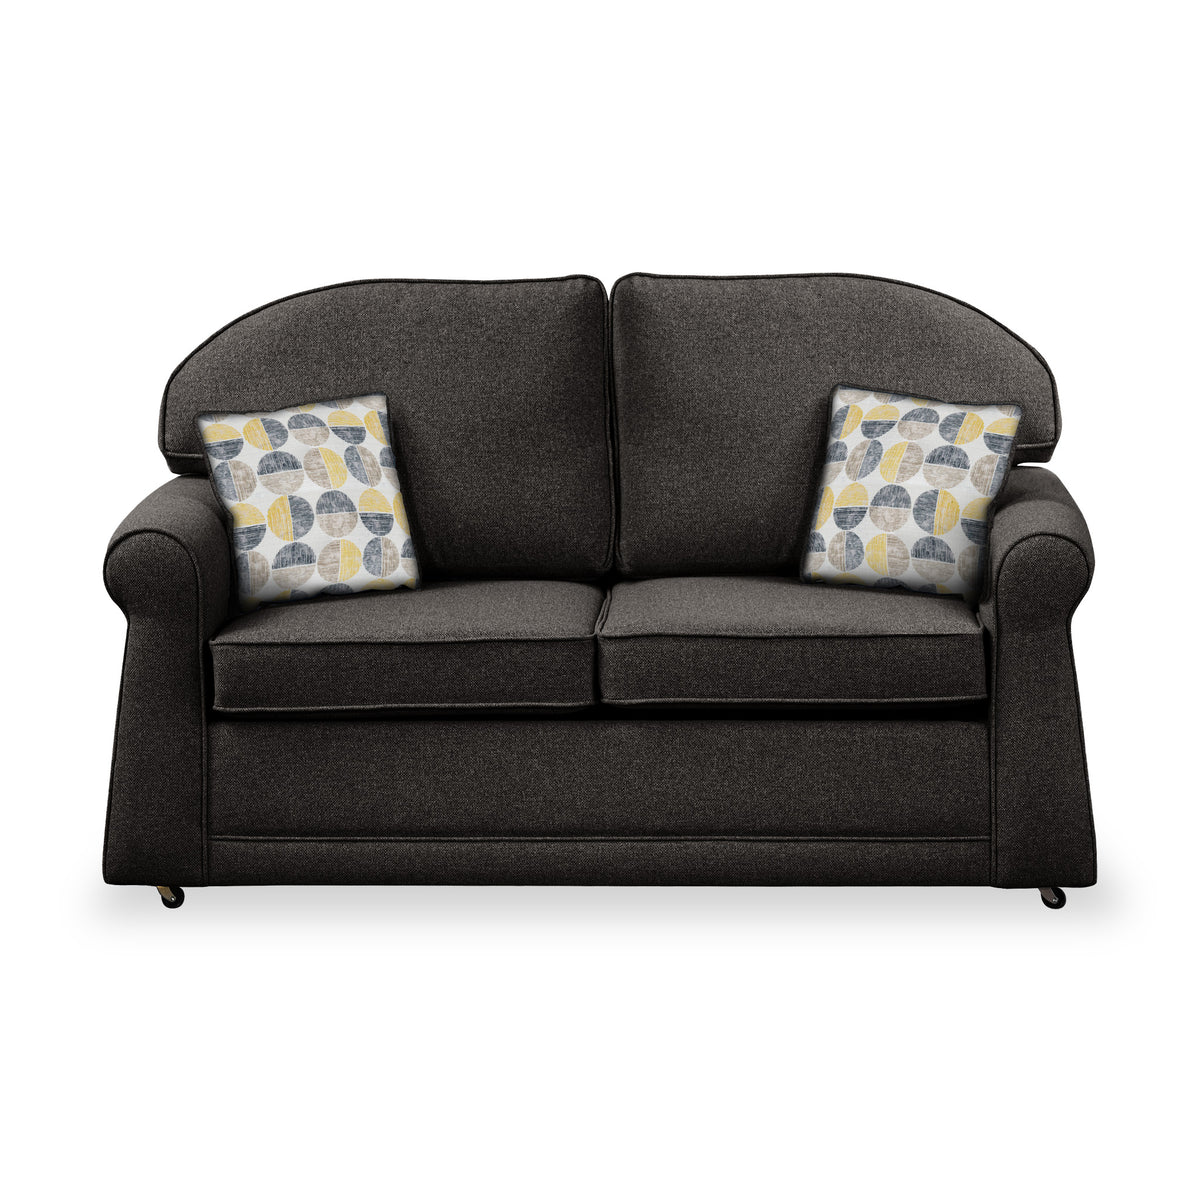 Croxdon Charcoal Faux Linen 2 Seater Sofabed with Beige Scatter Cushions from Roseland Furniture